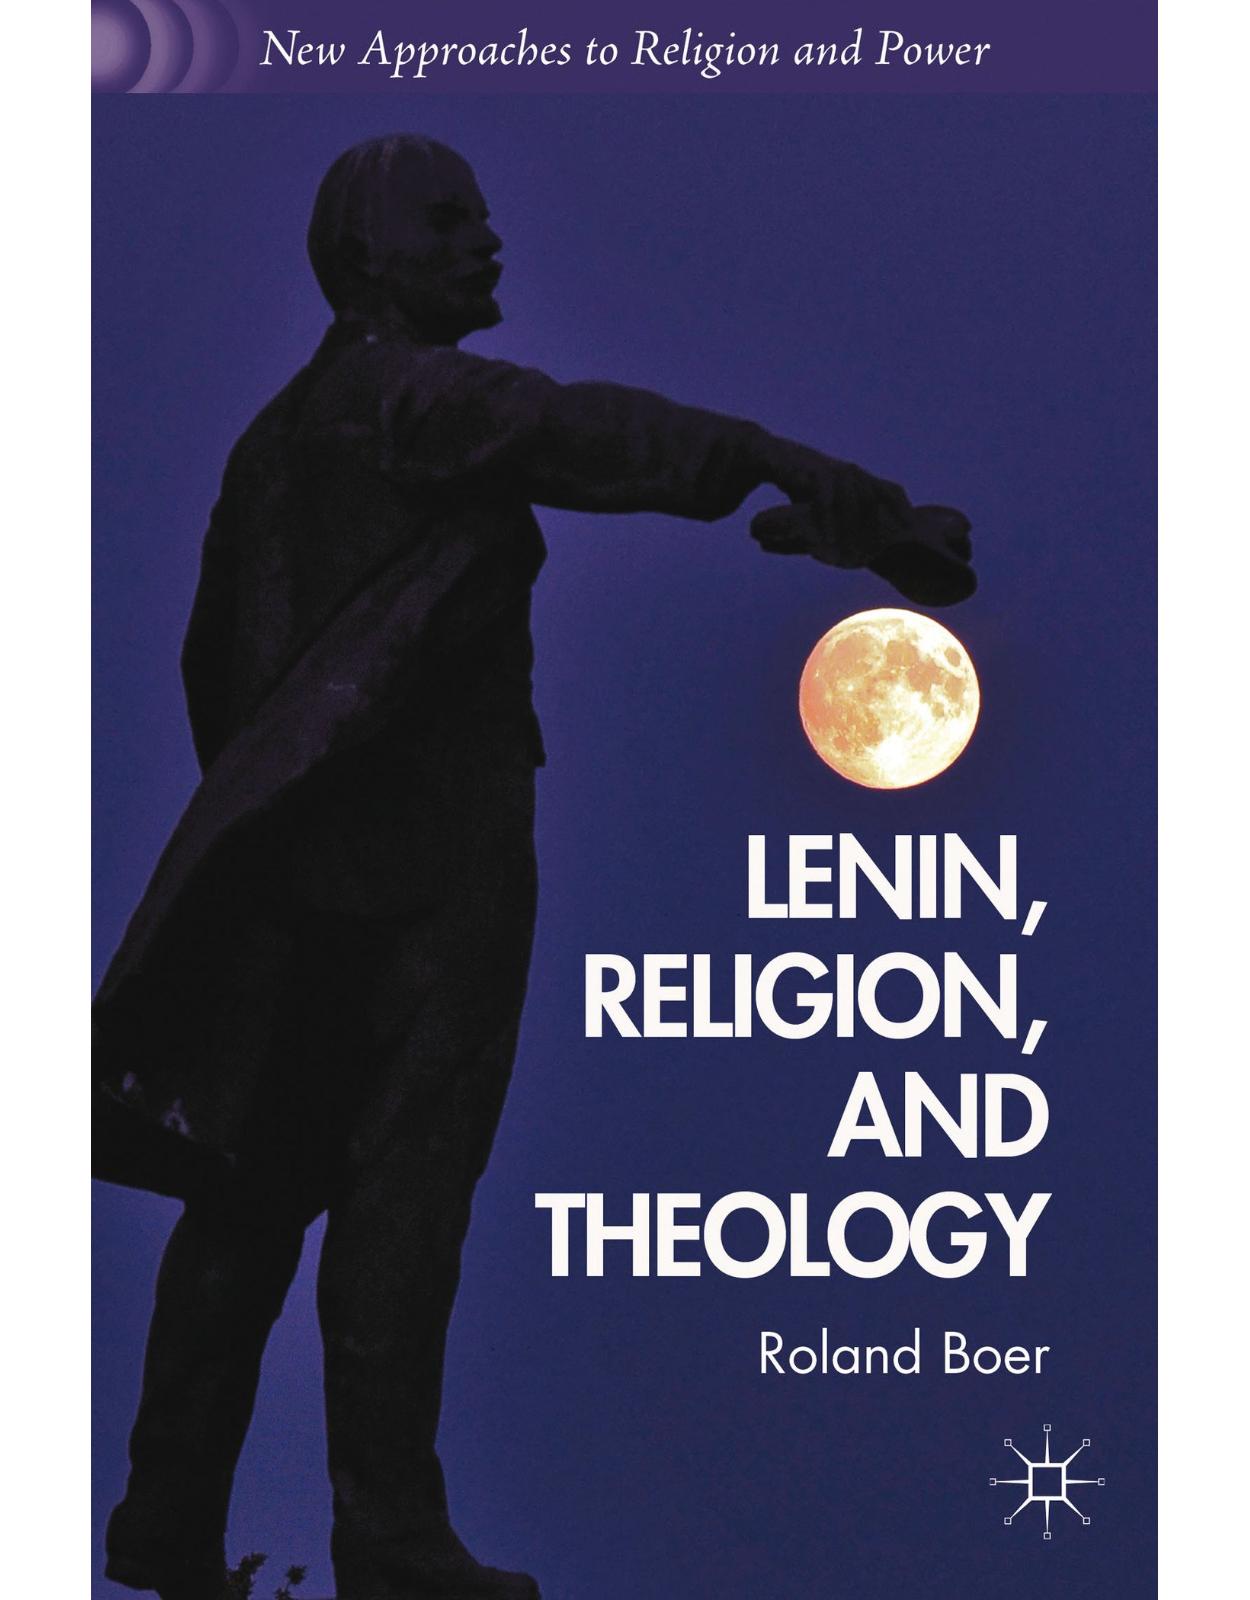 Lenin, Religion, and Theology (New Approaches to Religion and Power) 